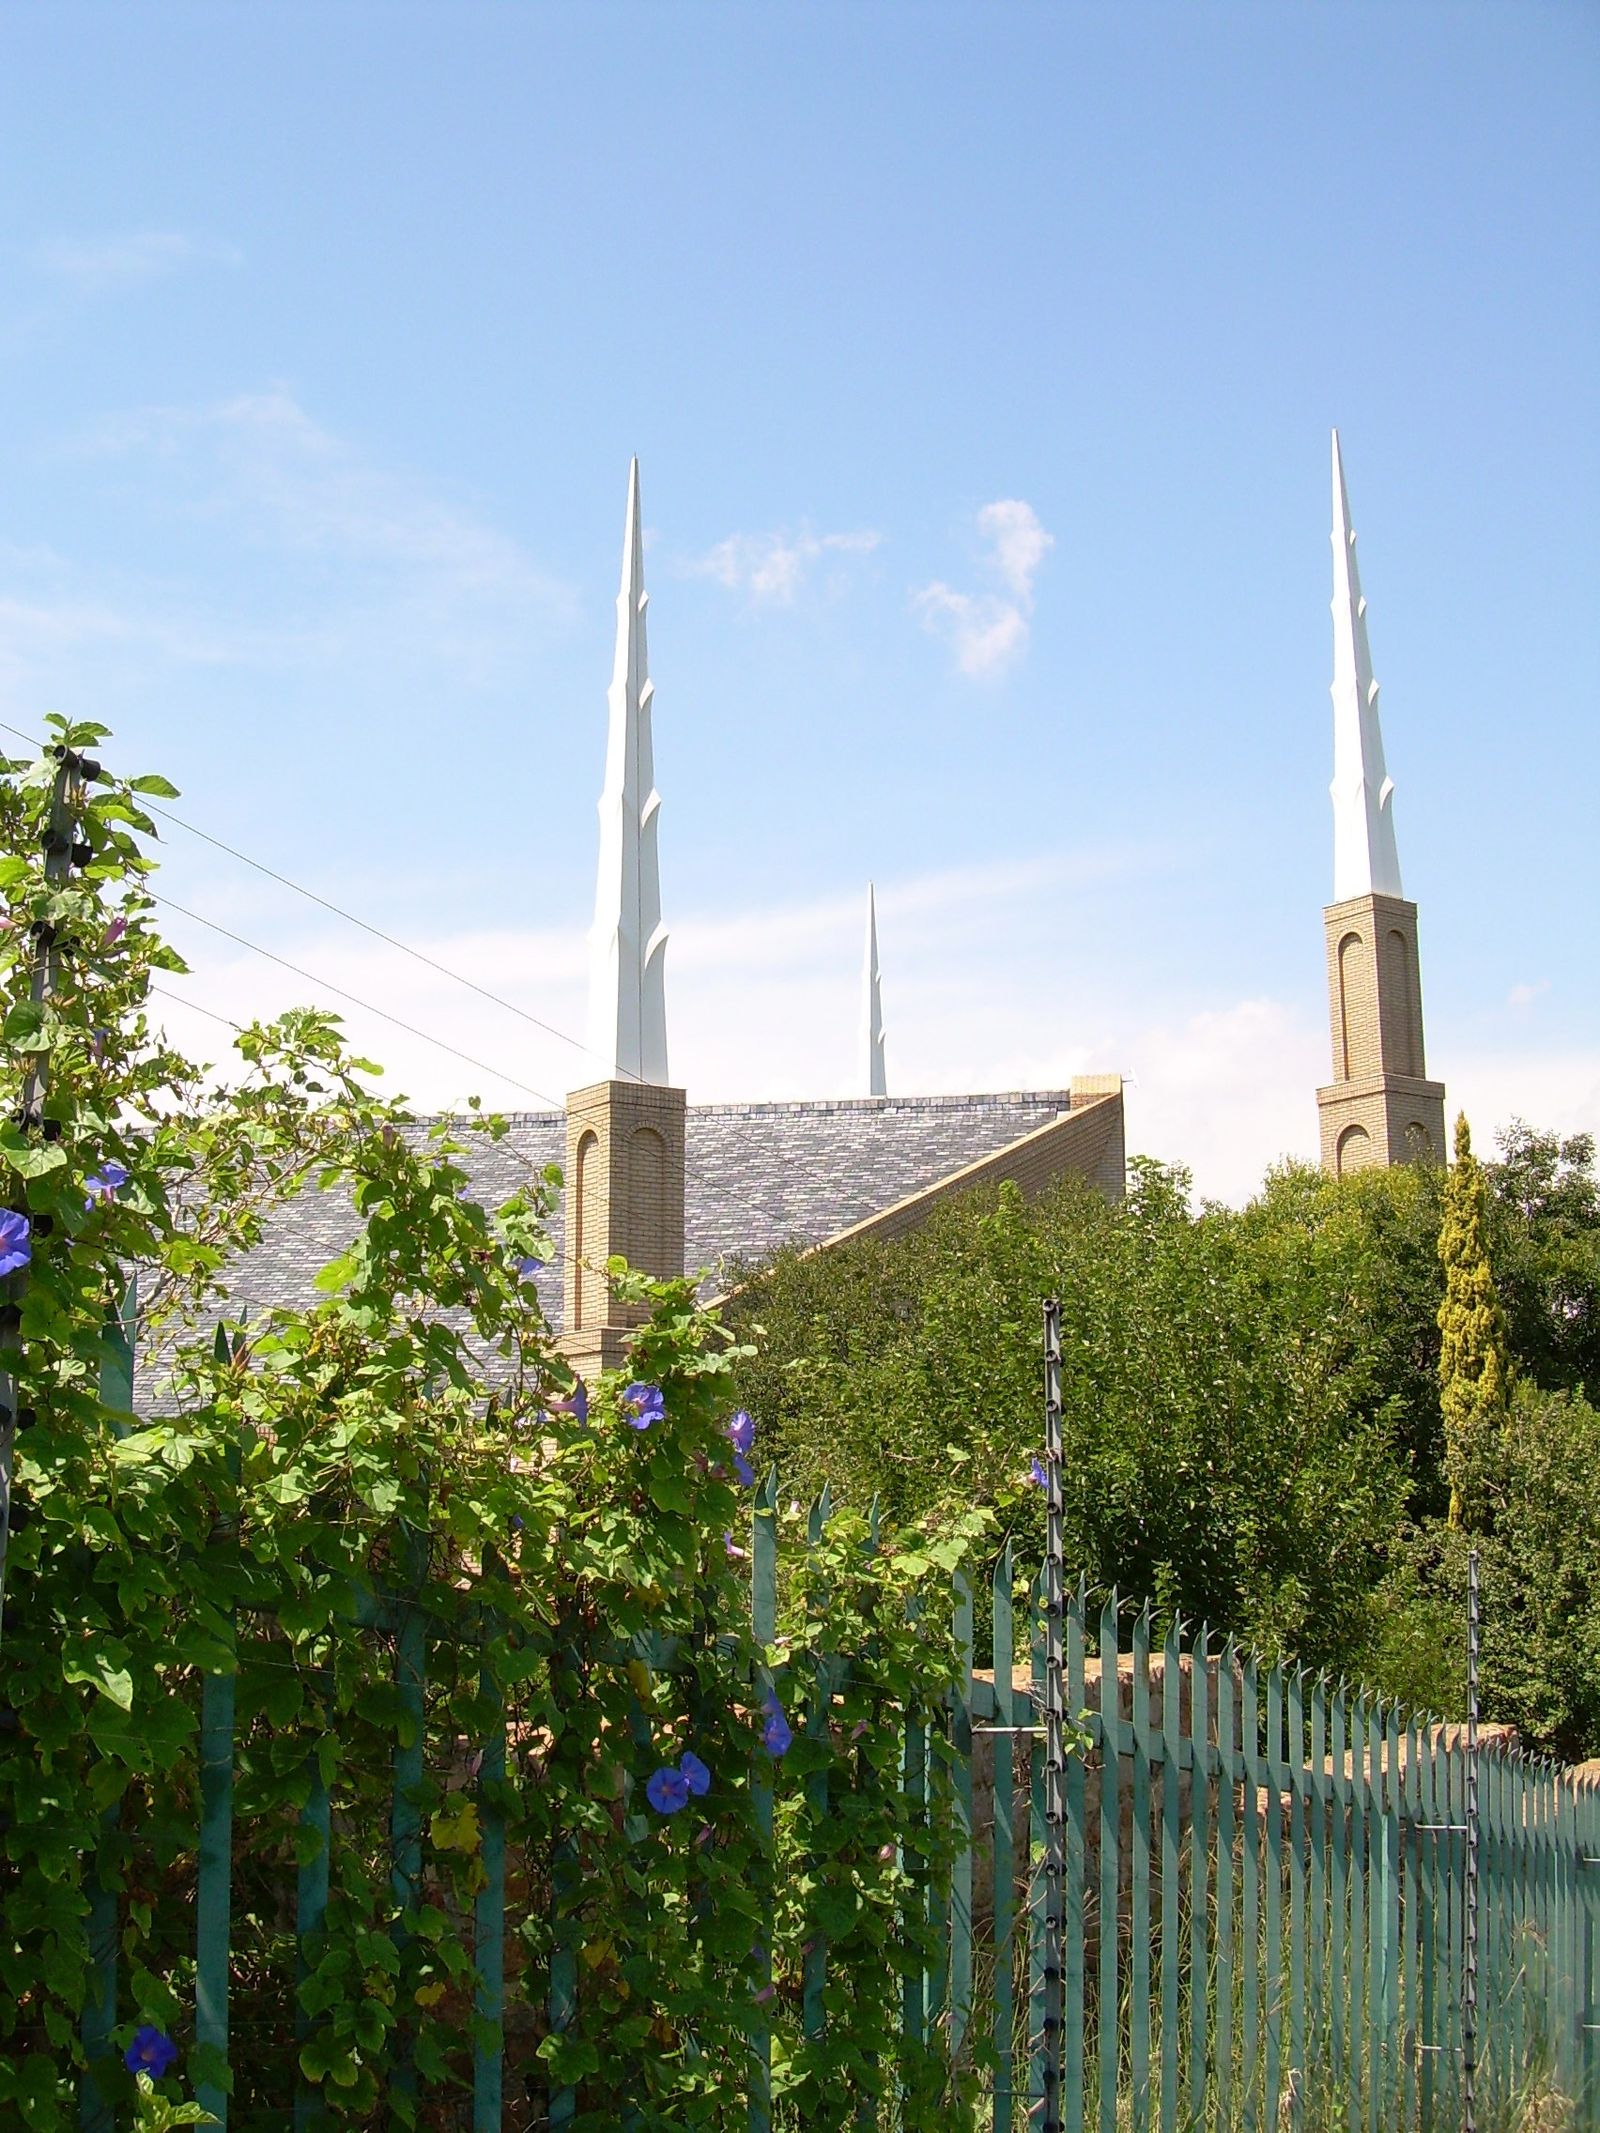 The Johannesburg South Africa Temple spires, including scenery and the exterior of the temple.